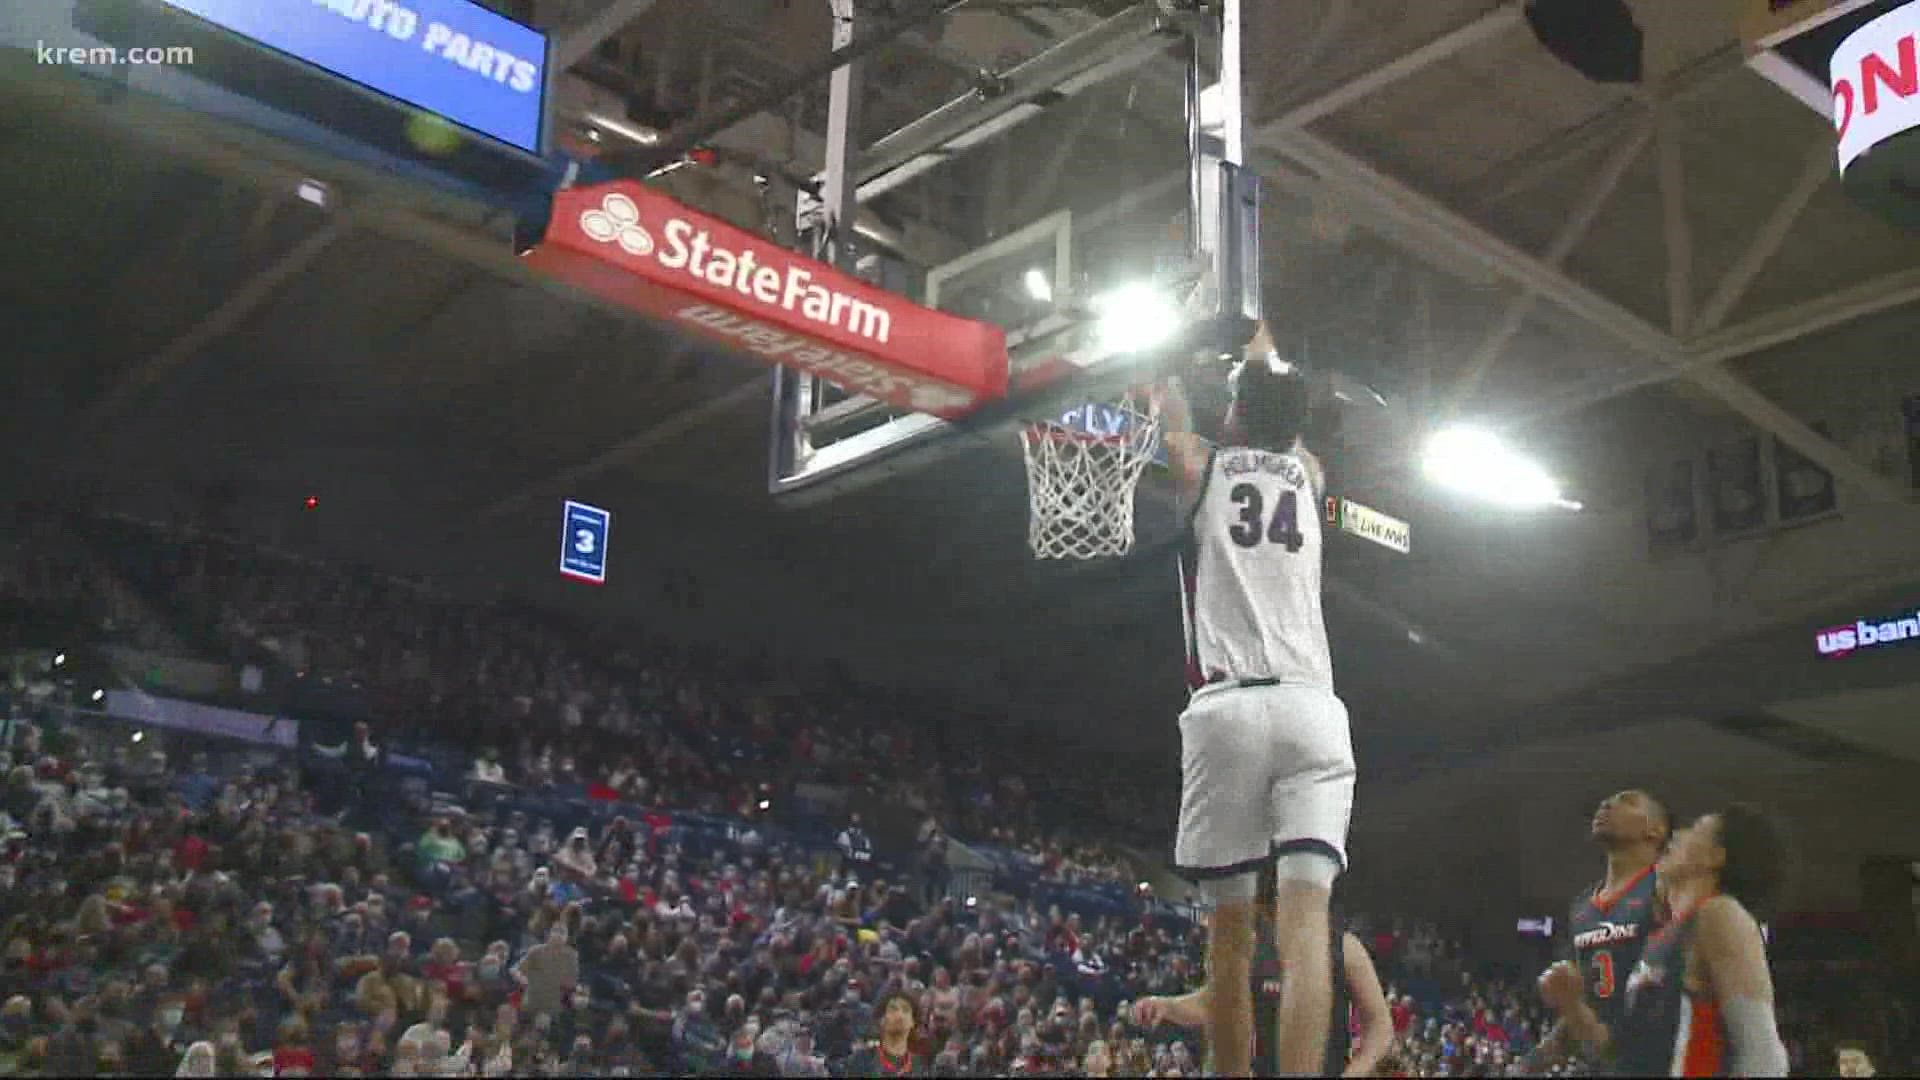 Gonzaga men's basketball team jumped two spots in the latest AP Top 25 College Basketball Poll.